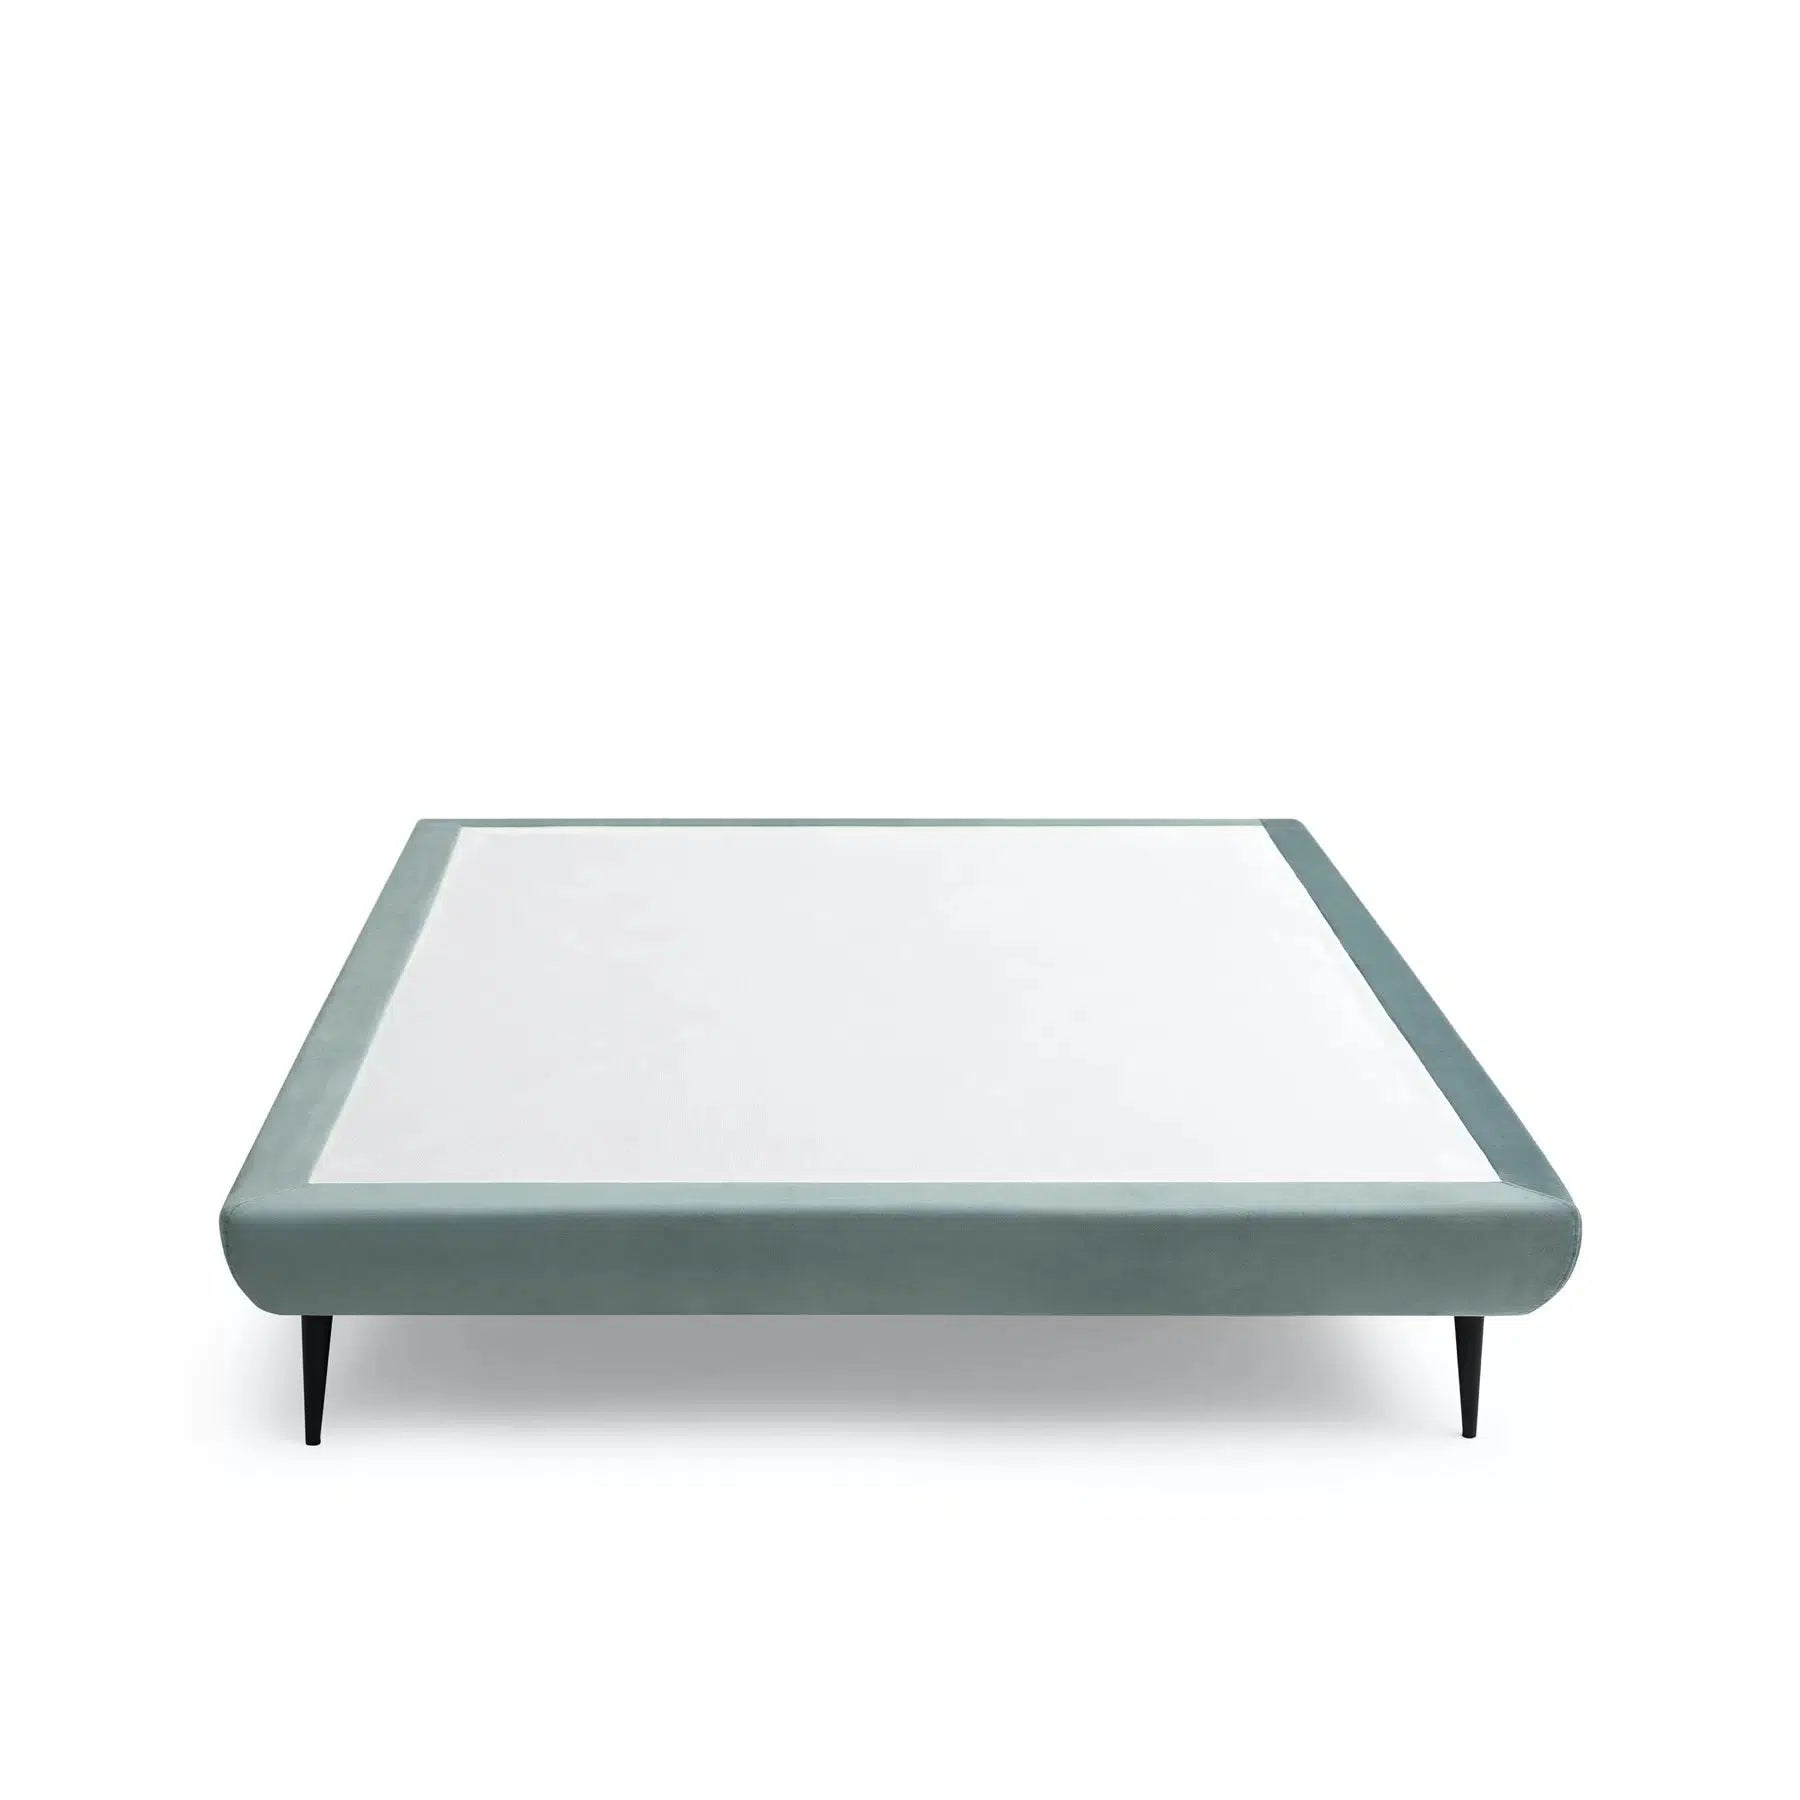 Dar 5204 Bed Base-TM Leader-Contract Furniture Store